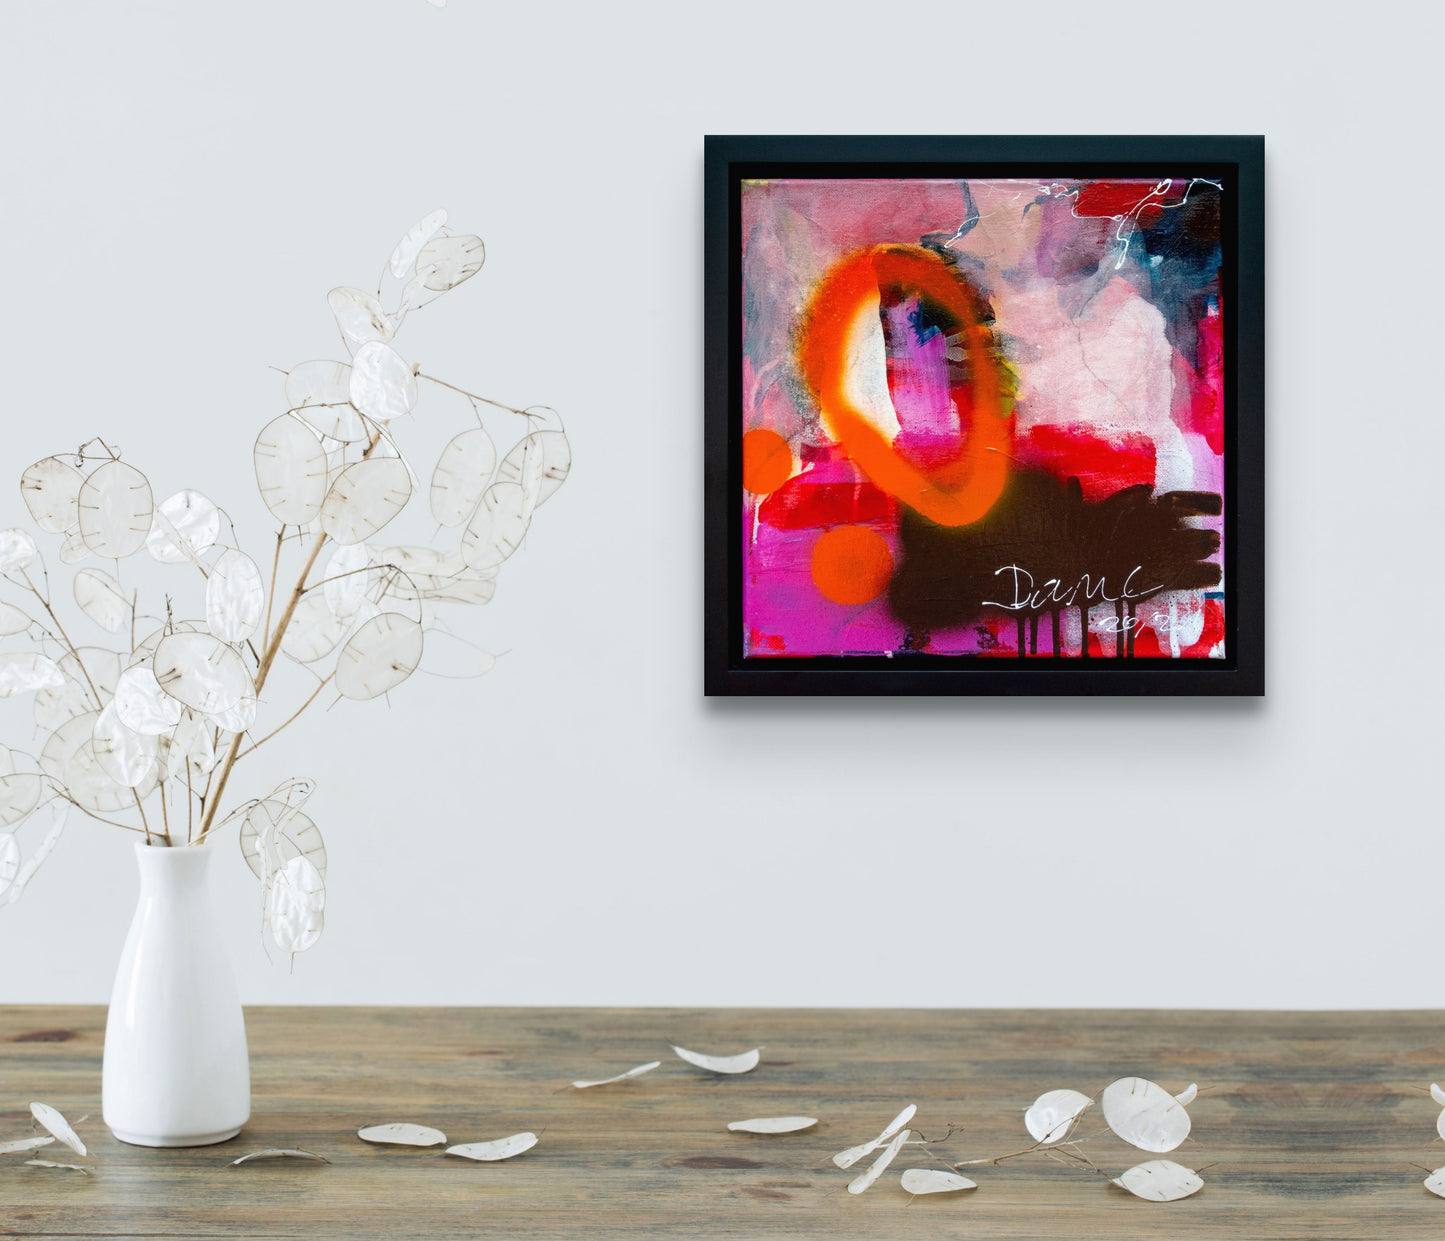 Colorful abstract painting using acrylic paint titled 'Dance' by artist Steffi Möllers; measures 12"x12" and 14"x14" with black frame; in situ on wall with vase filled with paper-like leaves